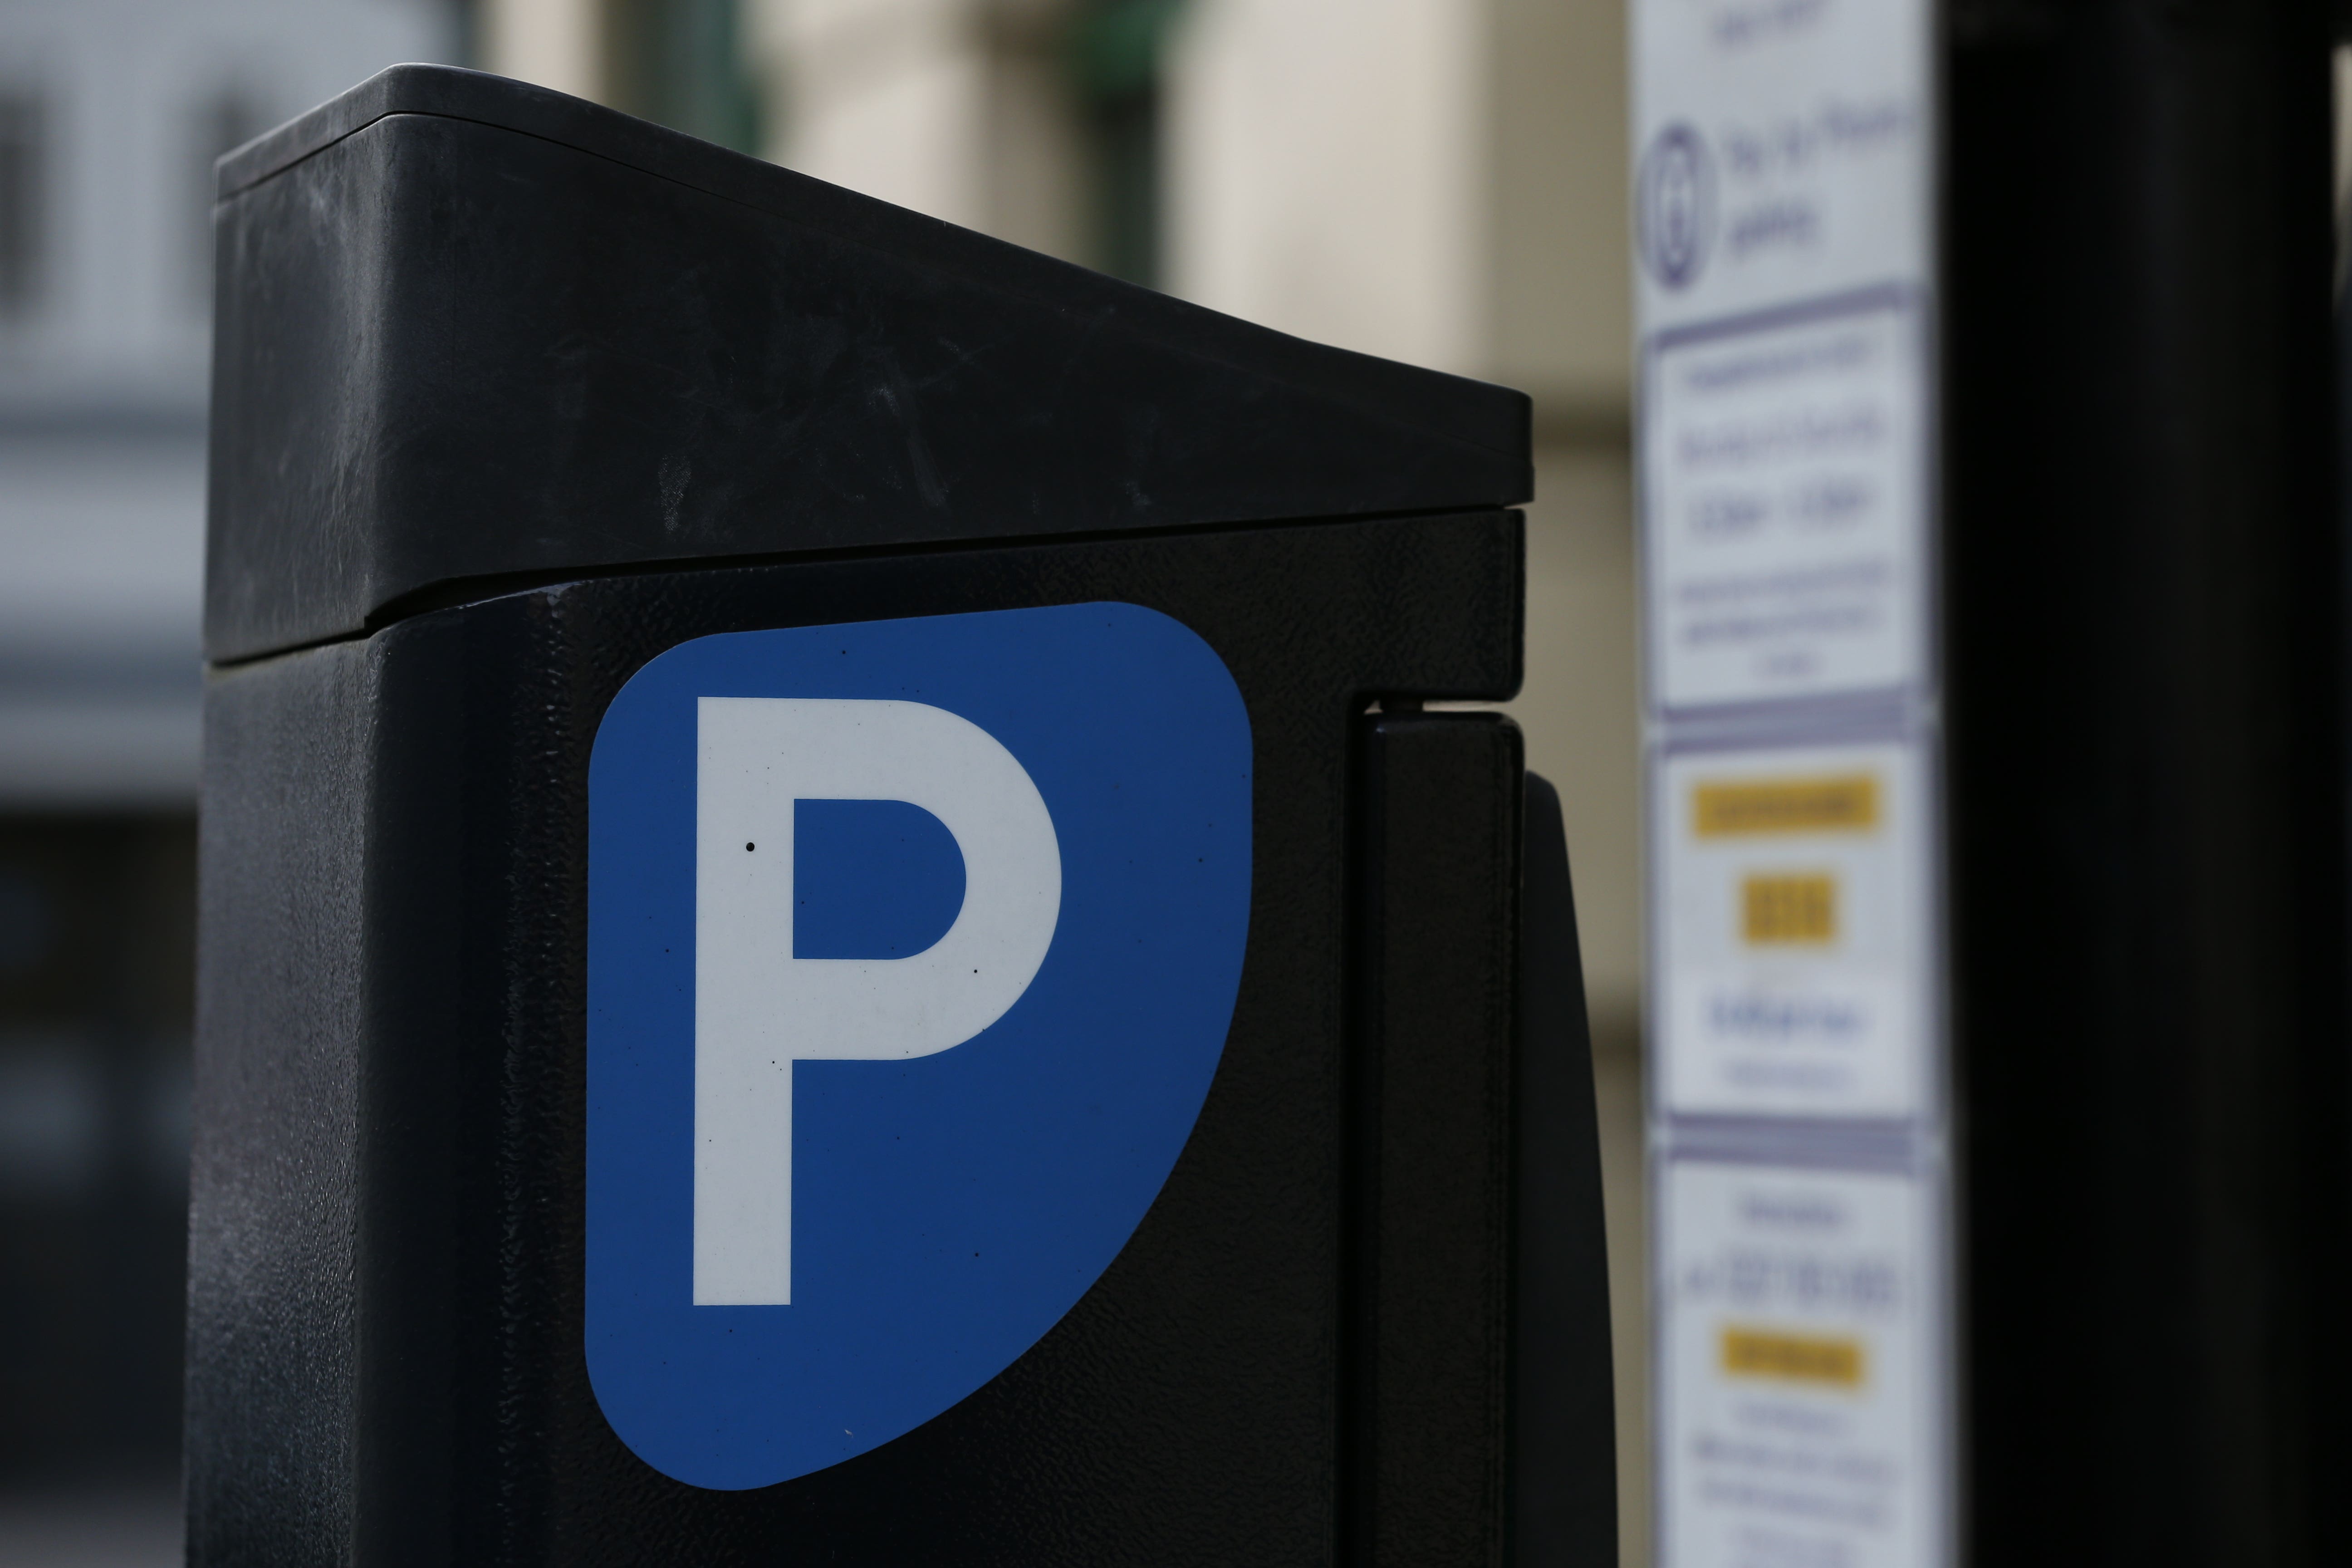 Drivers who parked at Railway Place and Duke Street car parks were left with a parking ticket